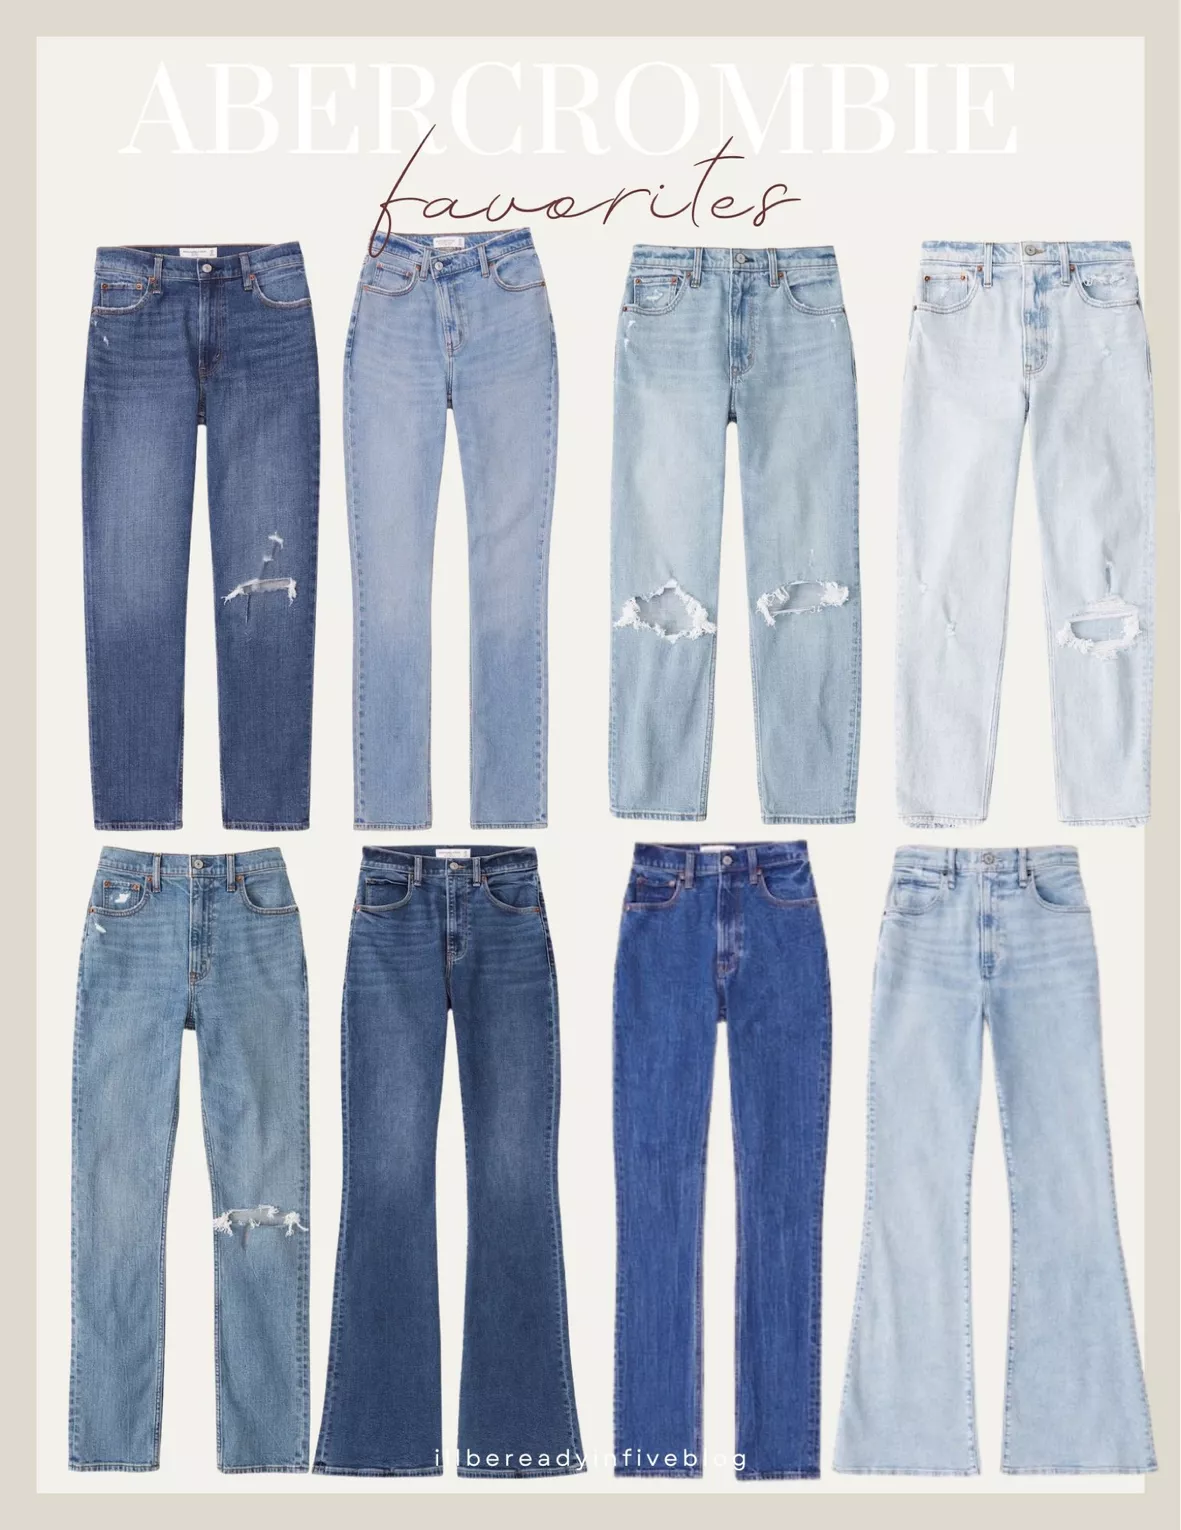 Women's Ultra High Rise 90s Slim … curated on LTK